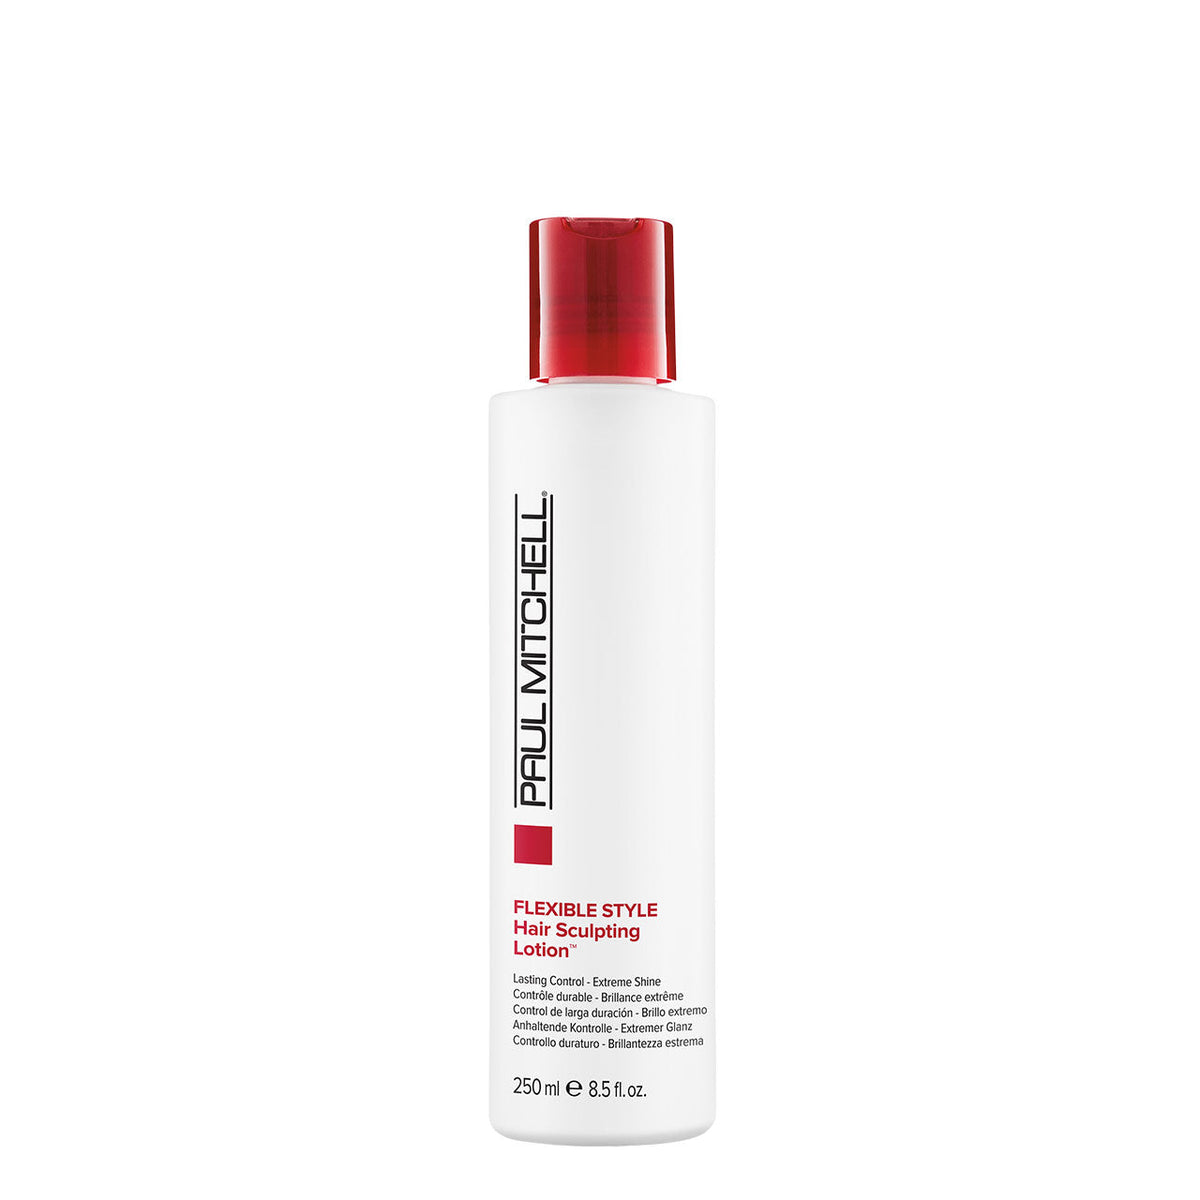 Flexible Style Hair Sculpting Lotion - by Paul Mitchell |ProCare Outlet|